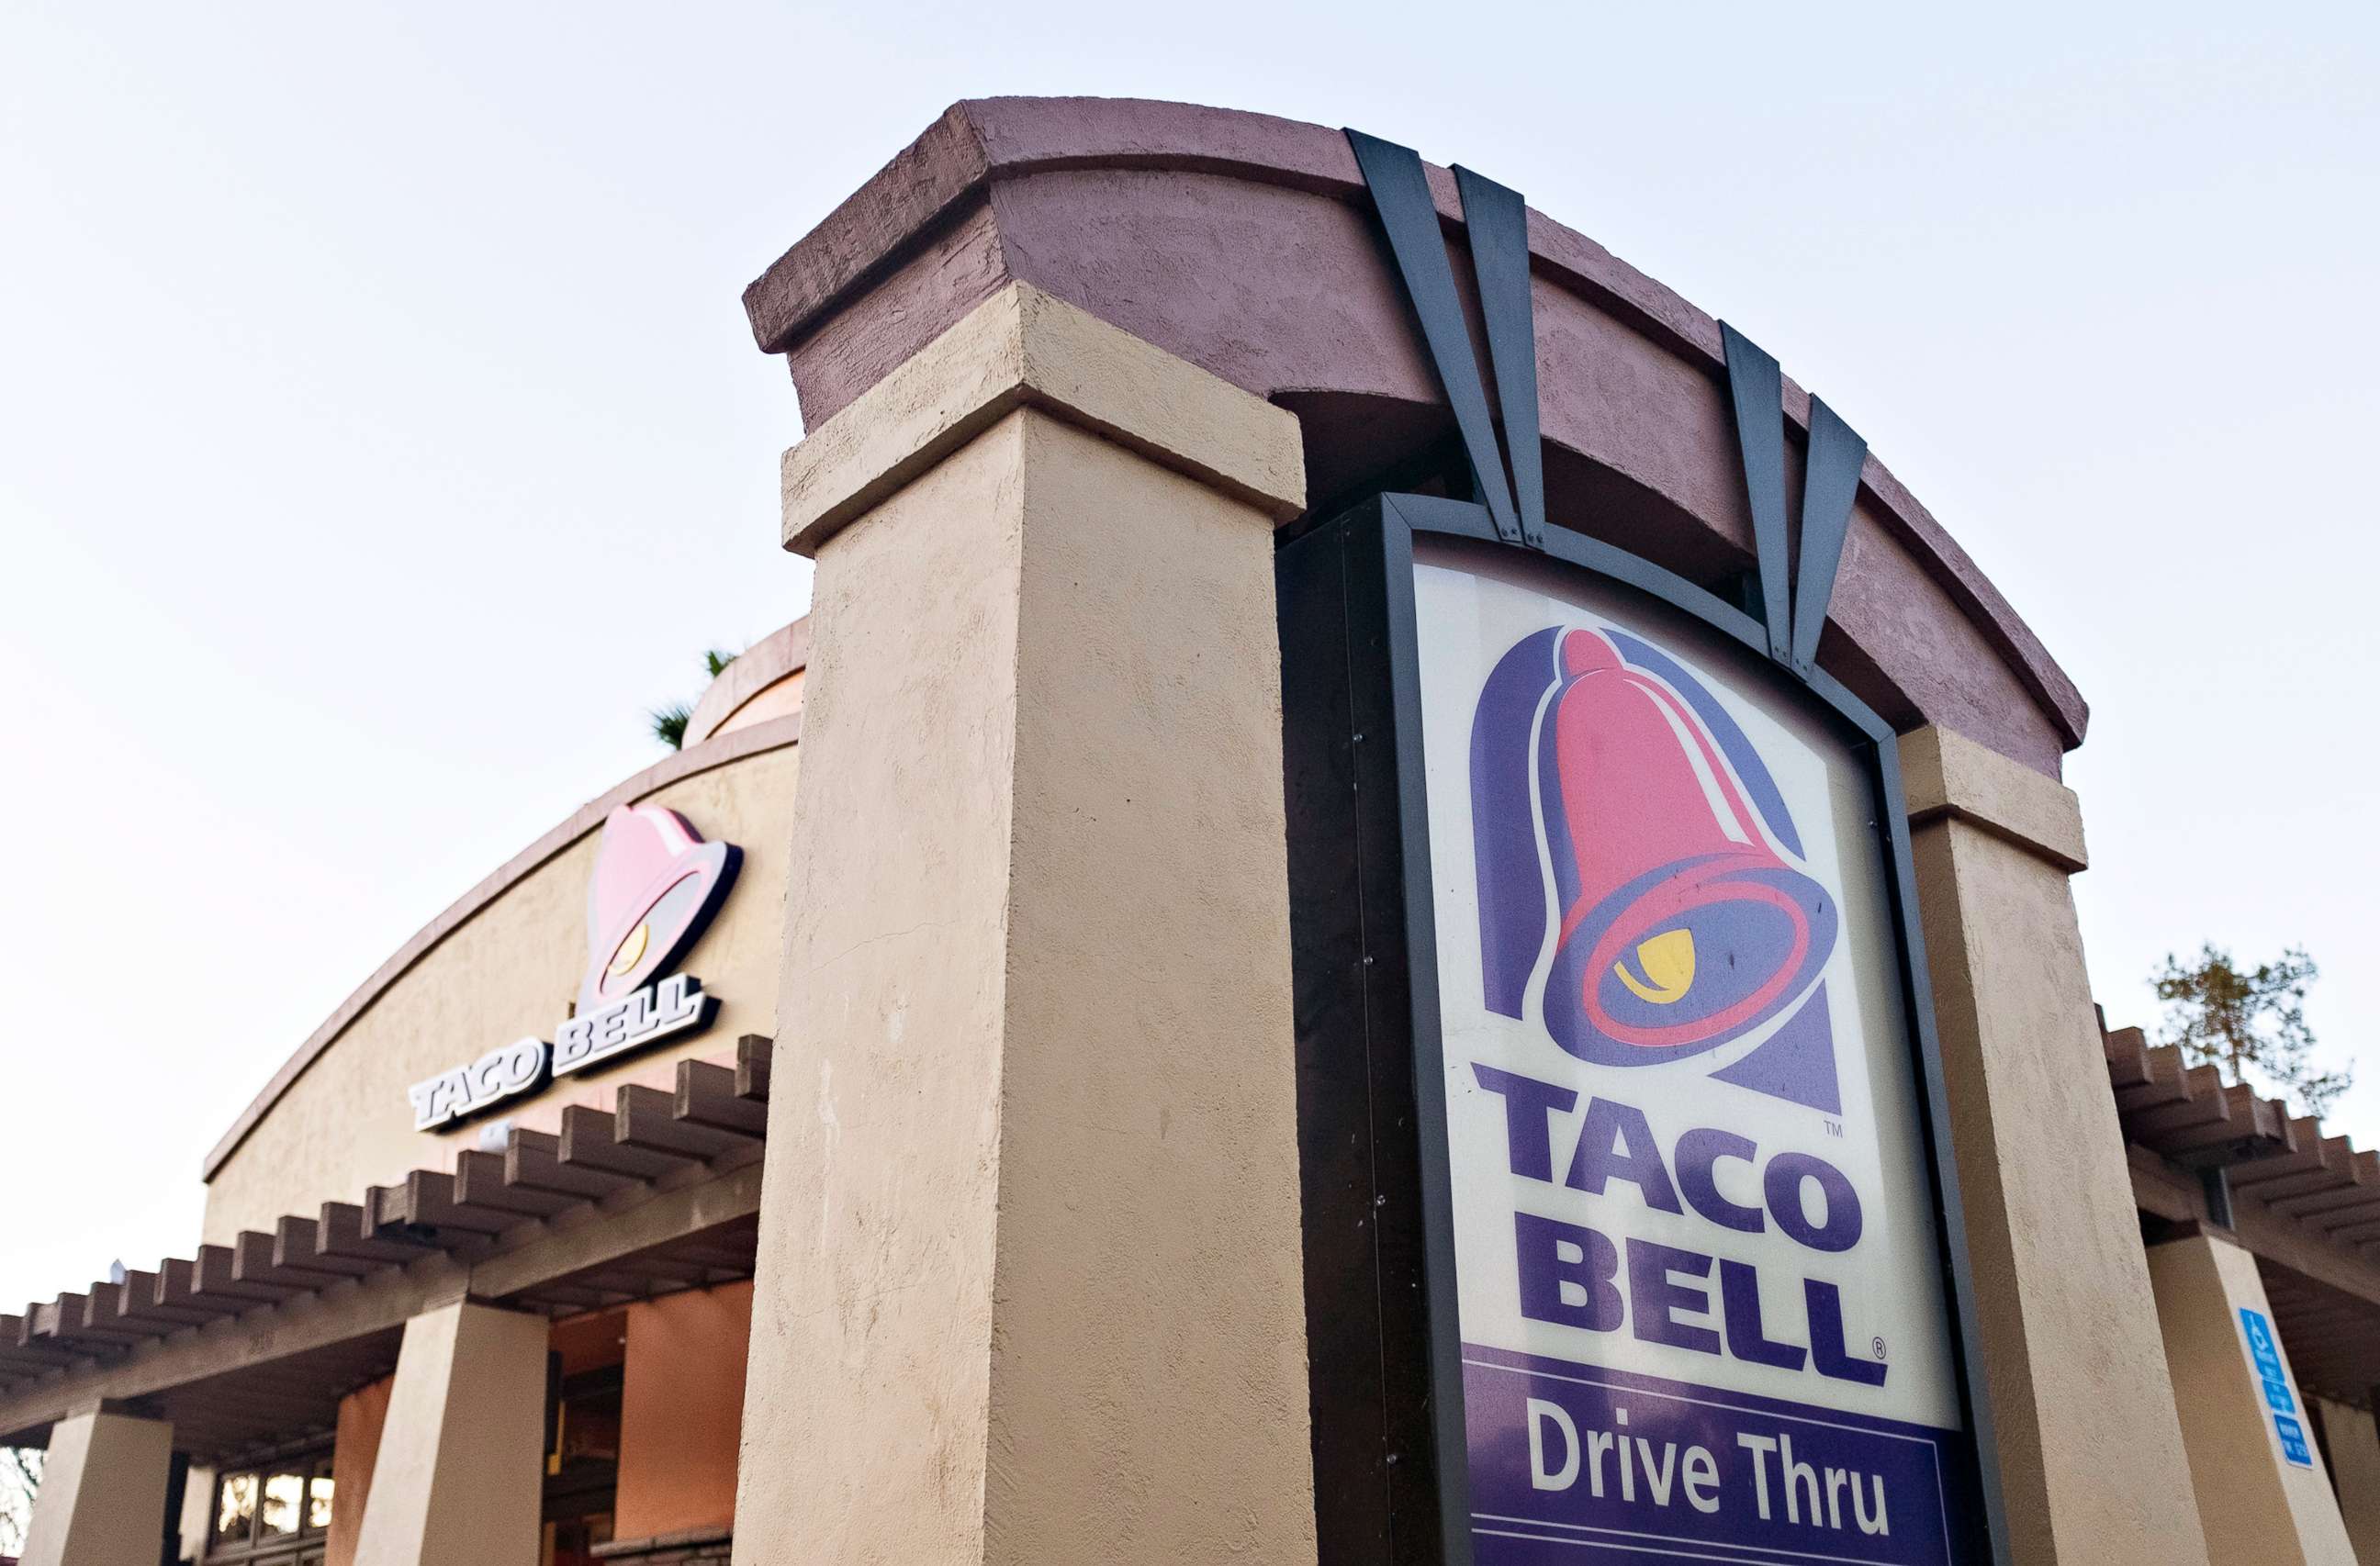 PHOTO: Taco Bell in California. Taco Bell CEO Mark King announced, March 13, 2020, that the fast-food chain is prepared to close all dining rooms and only offer drive-thru and delivery to help prevent the coronavirus from spreading.